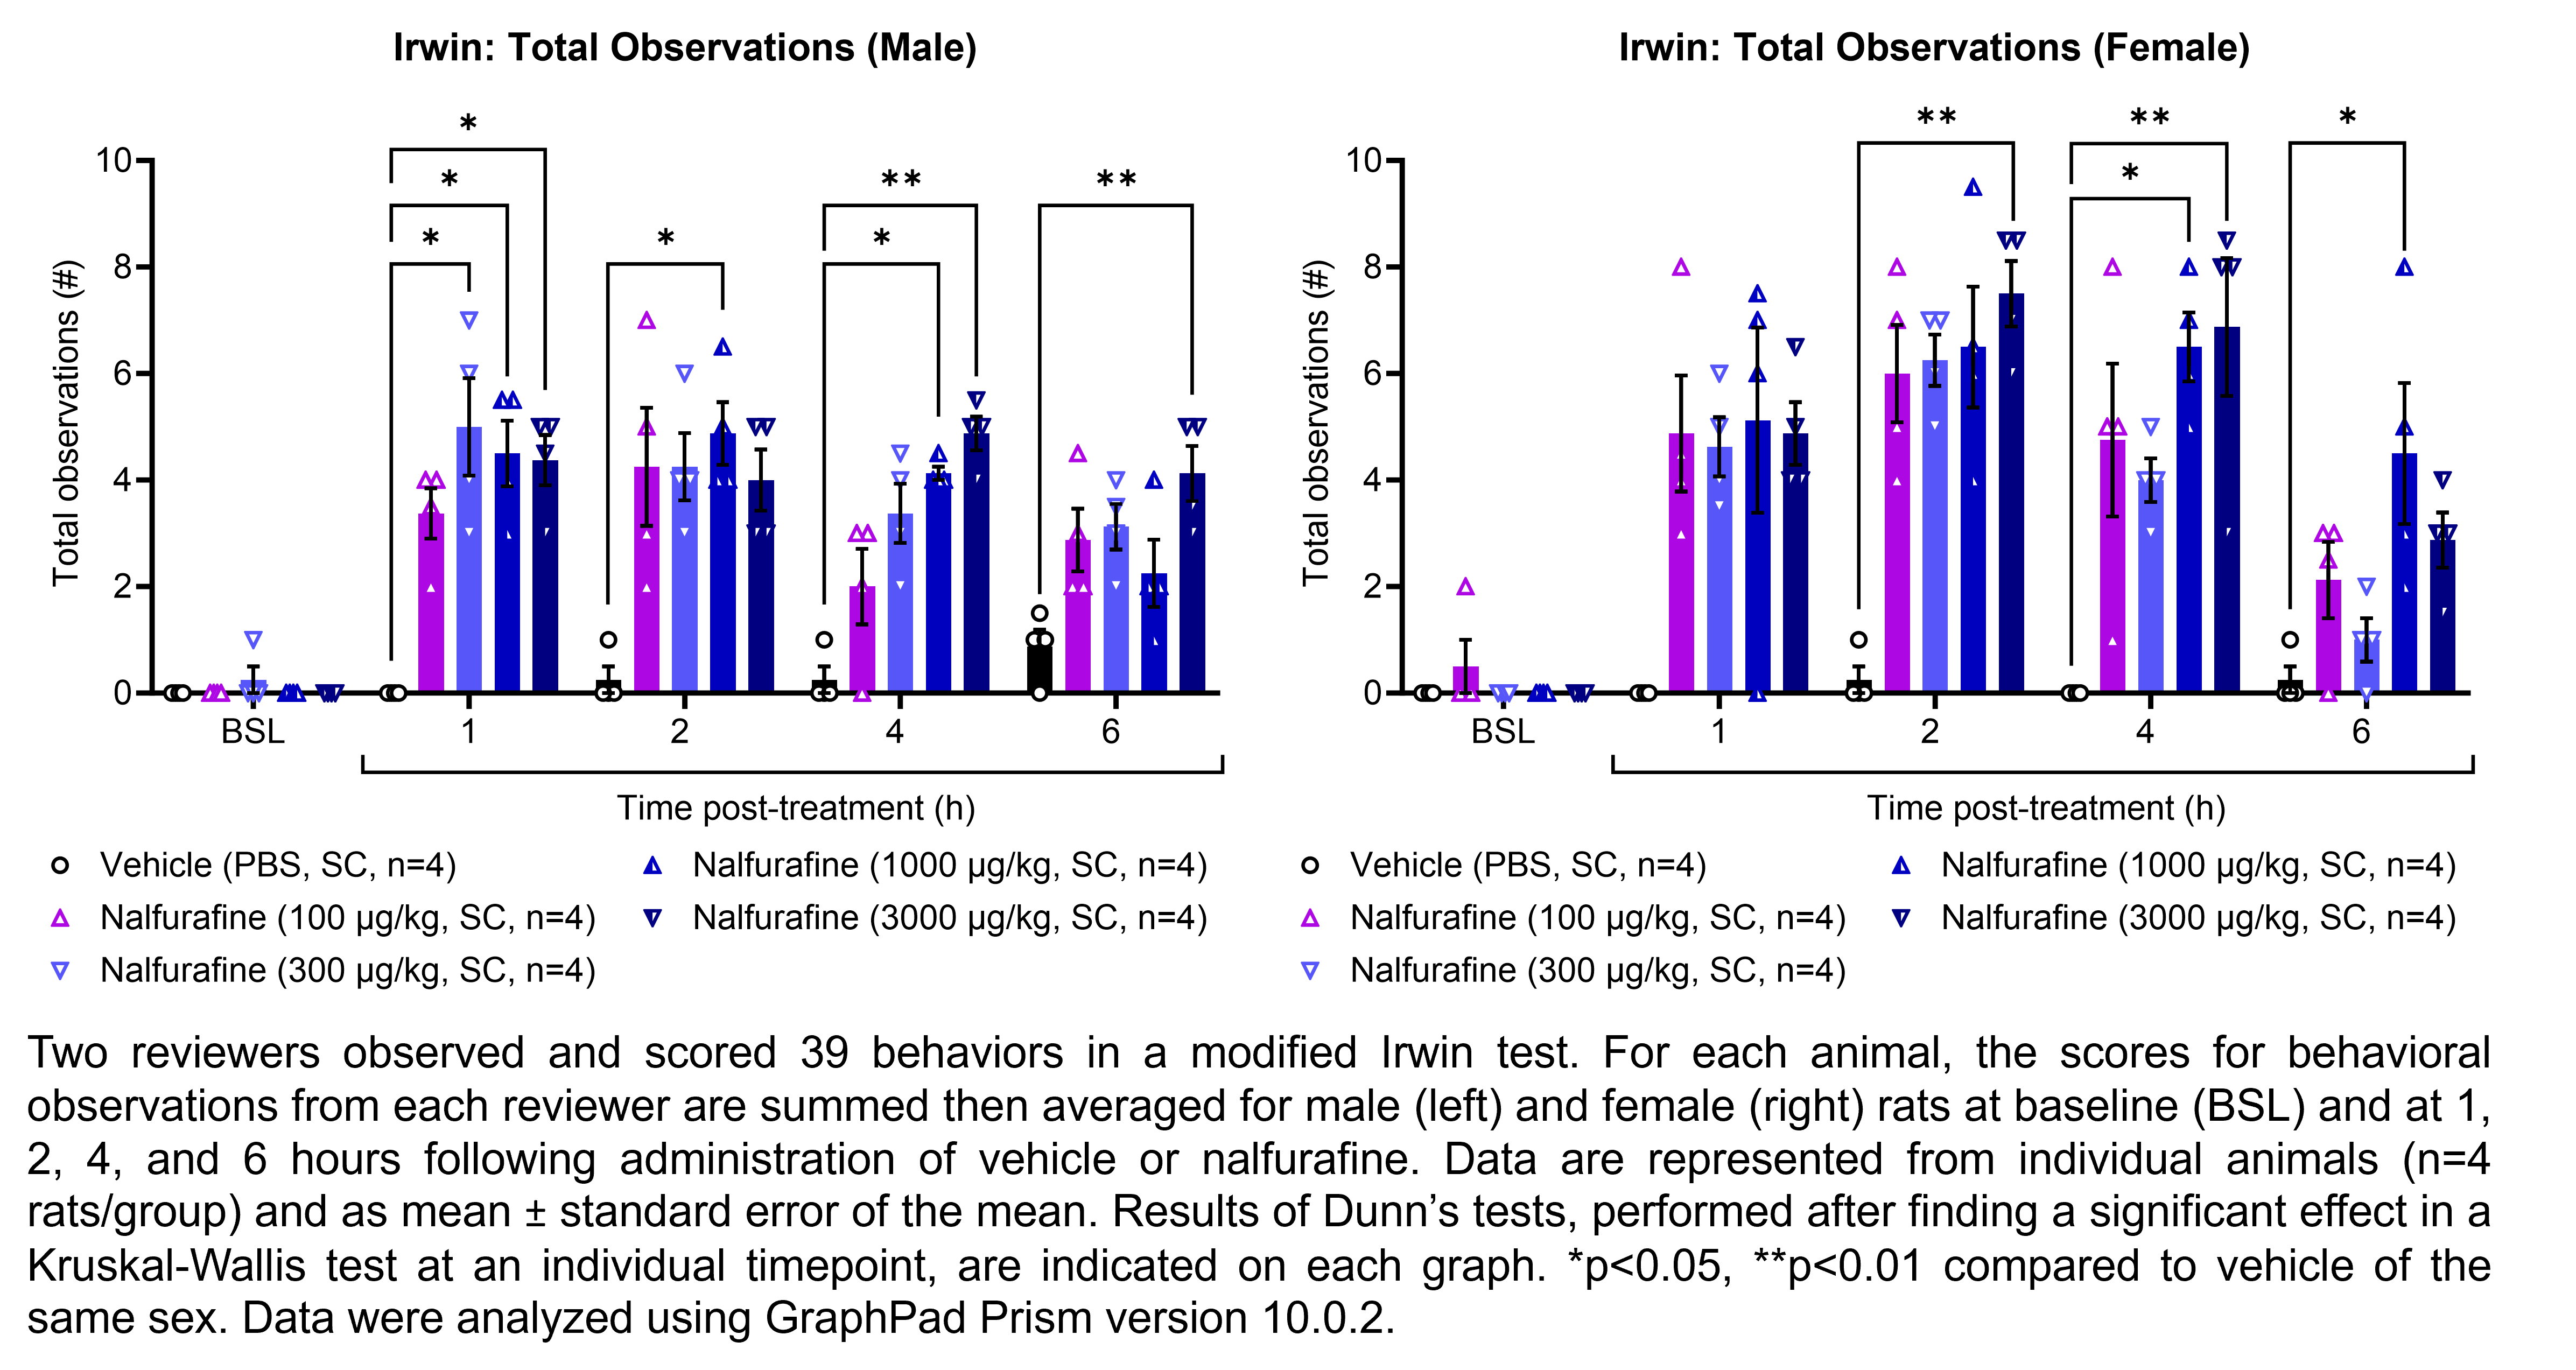 Two reviewers observed and scored 39 behaviors in a modified Irwin test. For each animal, the scores for behavioral observations from each reviewer are summed then averaged for male and female rats (shown on two graphs). Responses are shown at the following time points: baseline (before treatment) and at 1, 2, 4, and 6 hours after treatment with vehicle (0.5% methylcellulose, delivered PO) or carbamazepine (10, 30, 100, or 300 mg/kg, delivered PO). There were 4 rats per group. Kruskal-Wallis tests were performed at each timepoint for each sex, followed by Dunn’s tests when a significant effect was observed. Dunn’s tests found an increase in the number of observations relative to vehicle in males at 2 hours and 6 hours post-treatment with 300 mg/kg carbamazepine (p<0.05 for both comparisons). Dunn’s tests found an increase in the number of observations relative to vehicle in females at 4 hours post-treatment with 300 mg/kg carbamazepine (p<0.01) and at 6 hours post-treatment with 300 mg/kg carbamazepine (p<0.05). Data were analyzed using GraphPad Prism version 10.0.2.